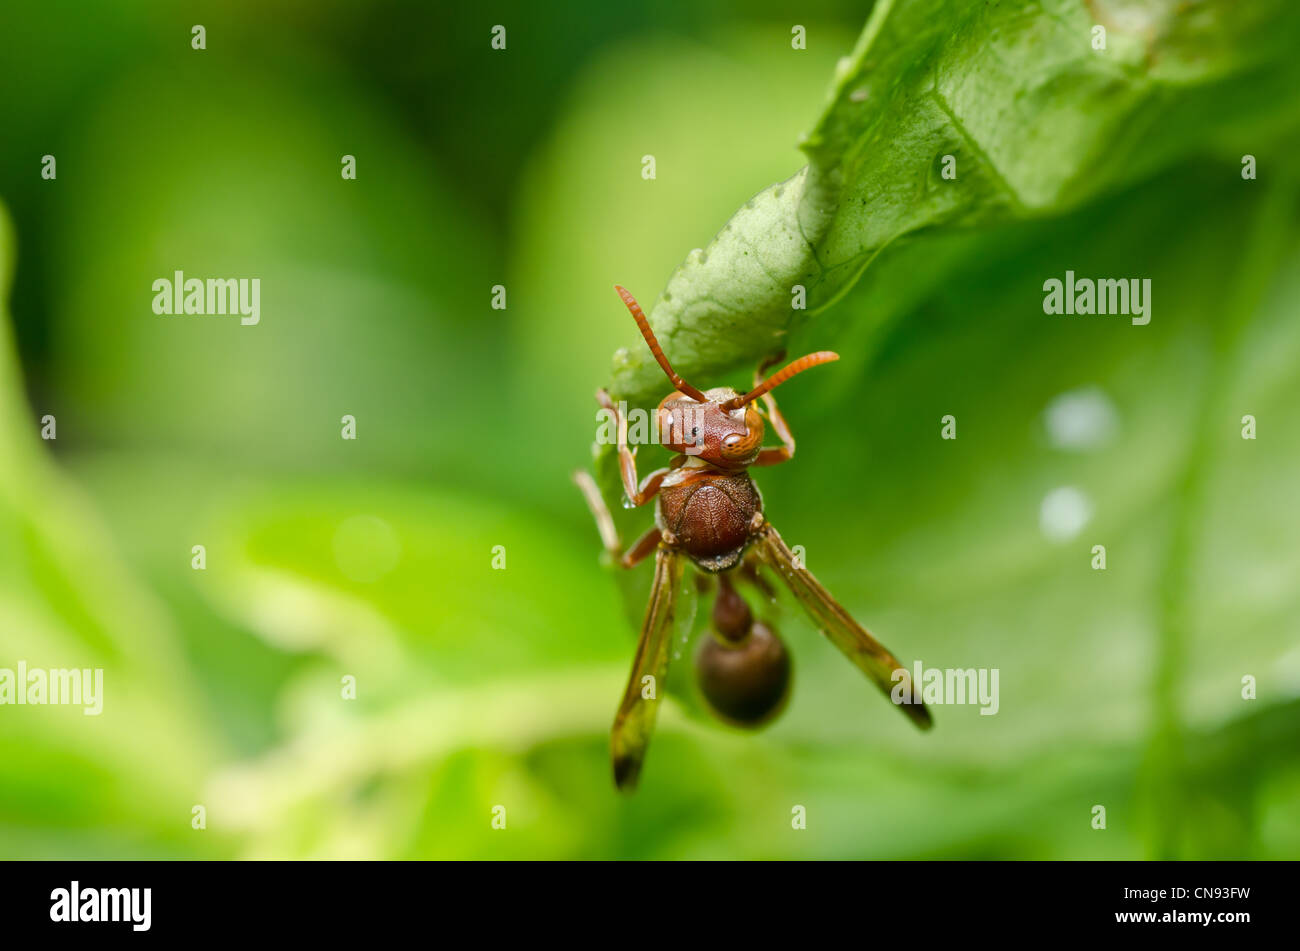 wasp in green nature or in garden. It's danger. Stock Photo